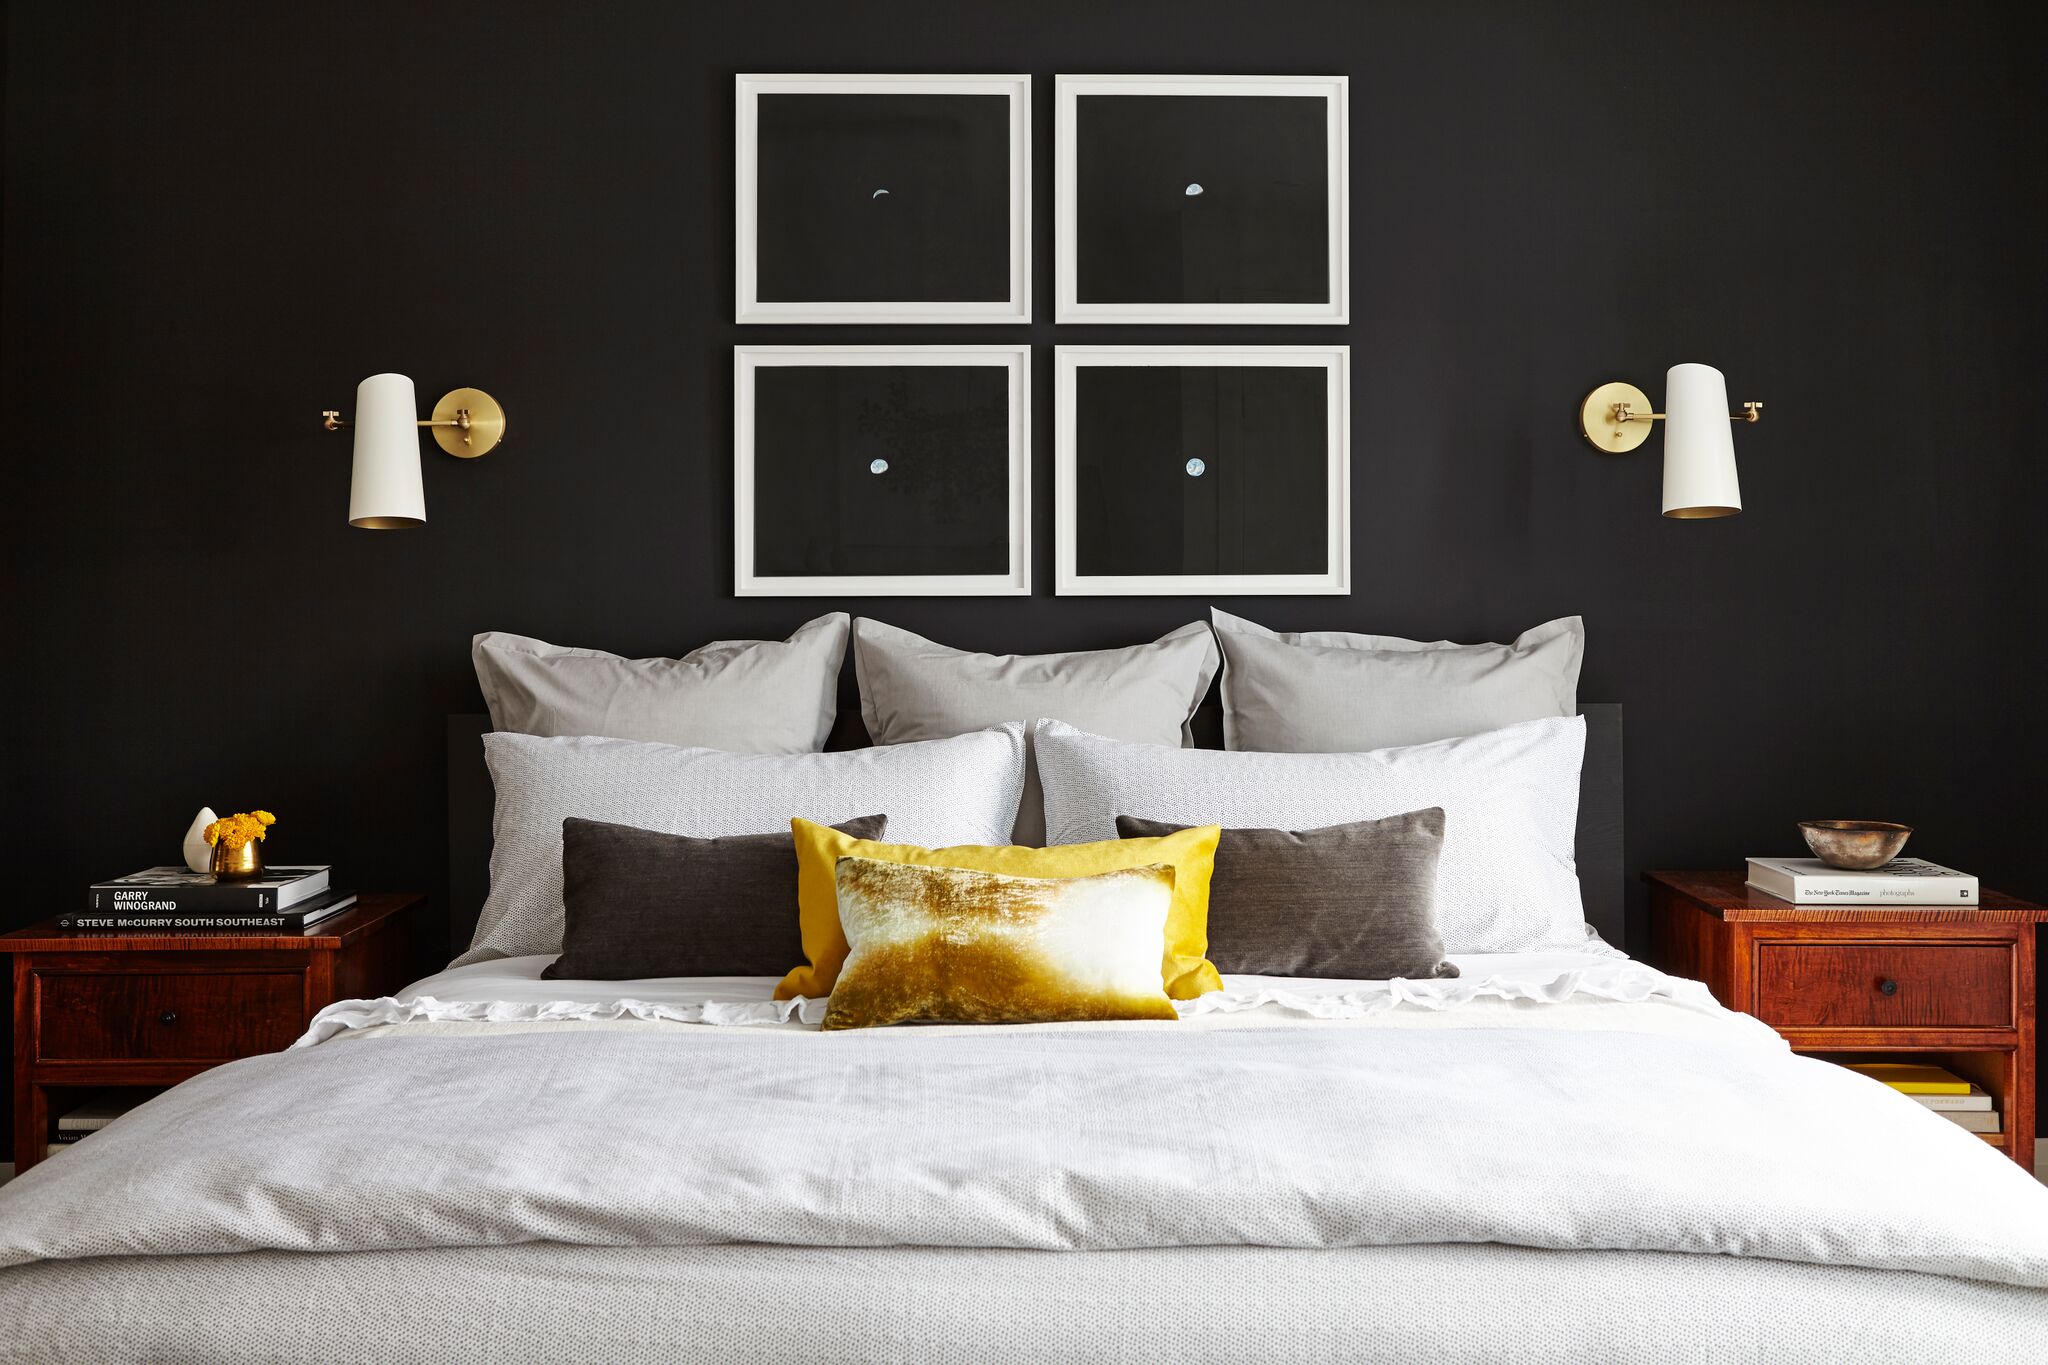 bedroom facing black focal wall with four black prints with white dot in centre